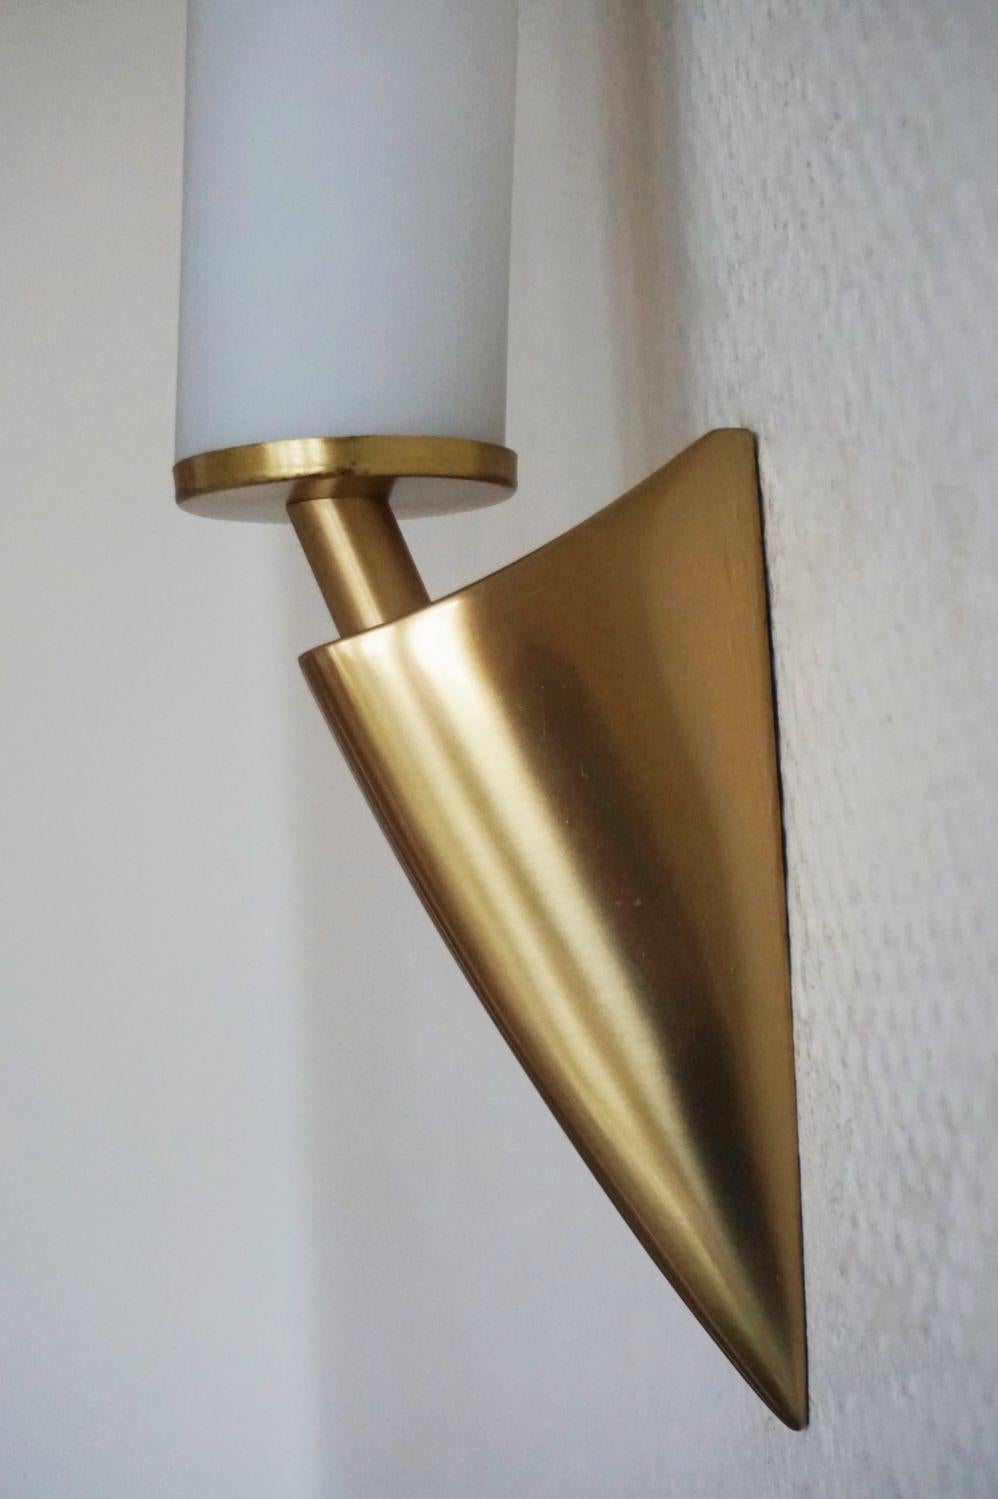 Stained Pair of Italian Midcentury Brushed Brass and Satin Glass Wall Sconces, 1950s For Sale